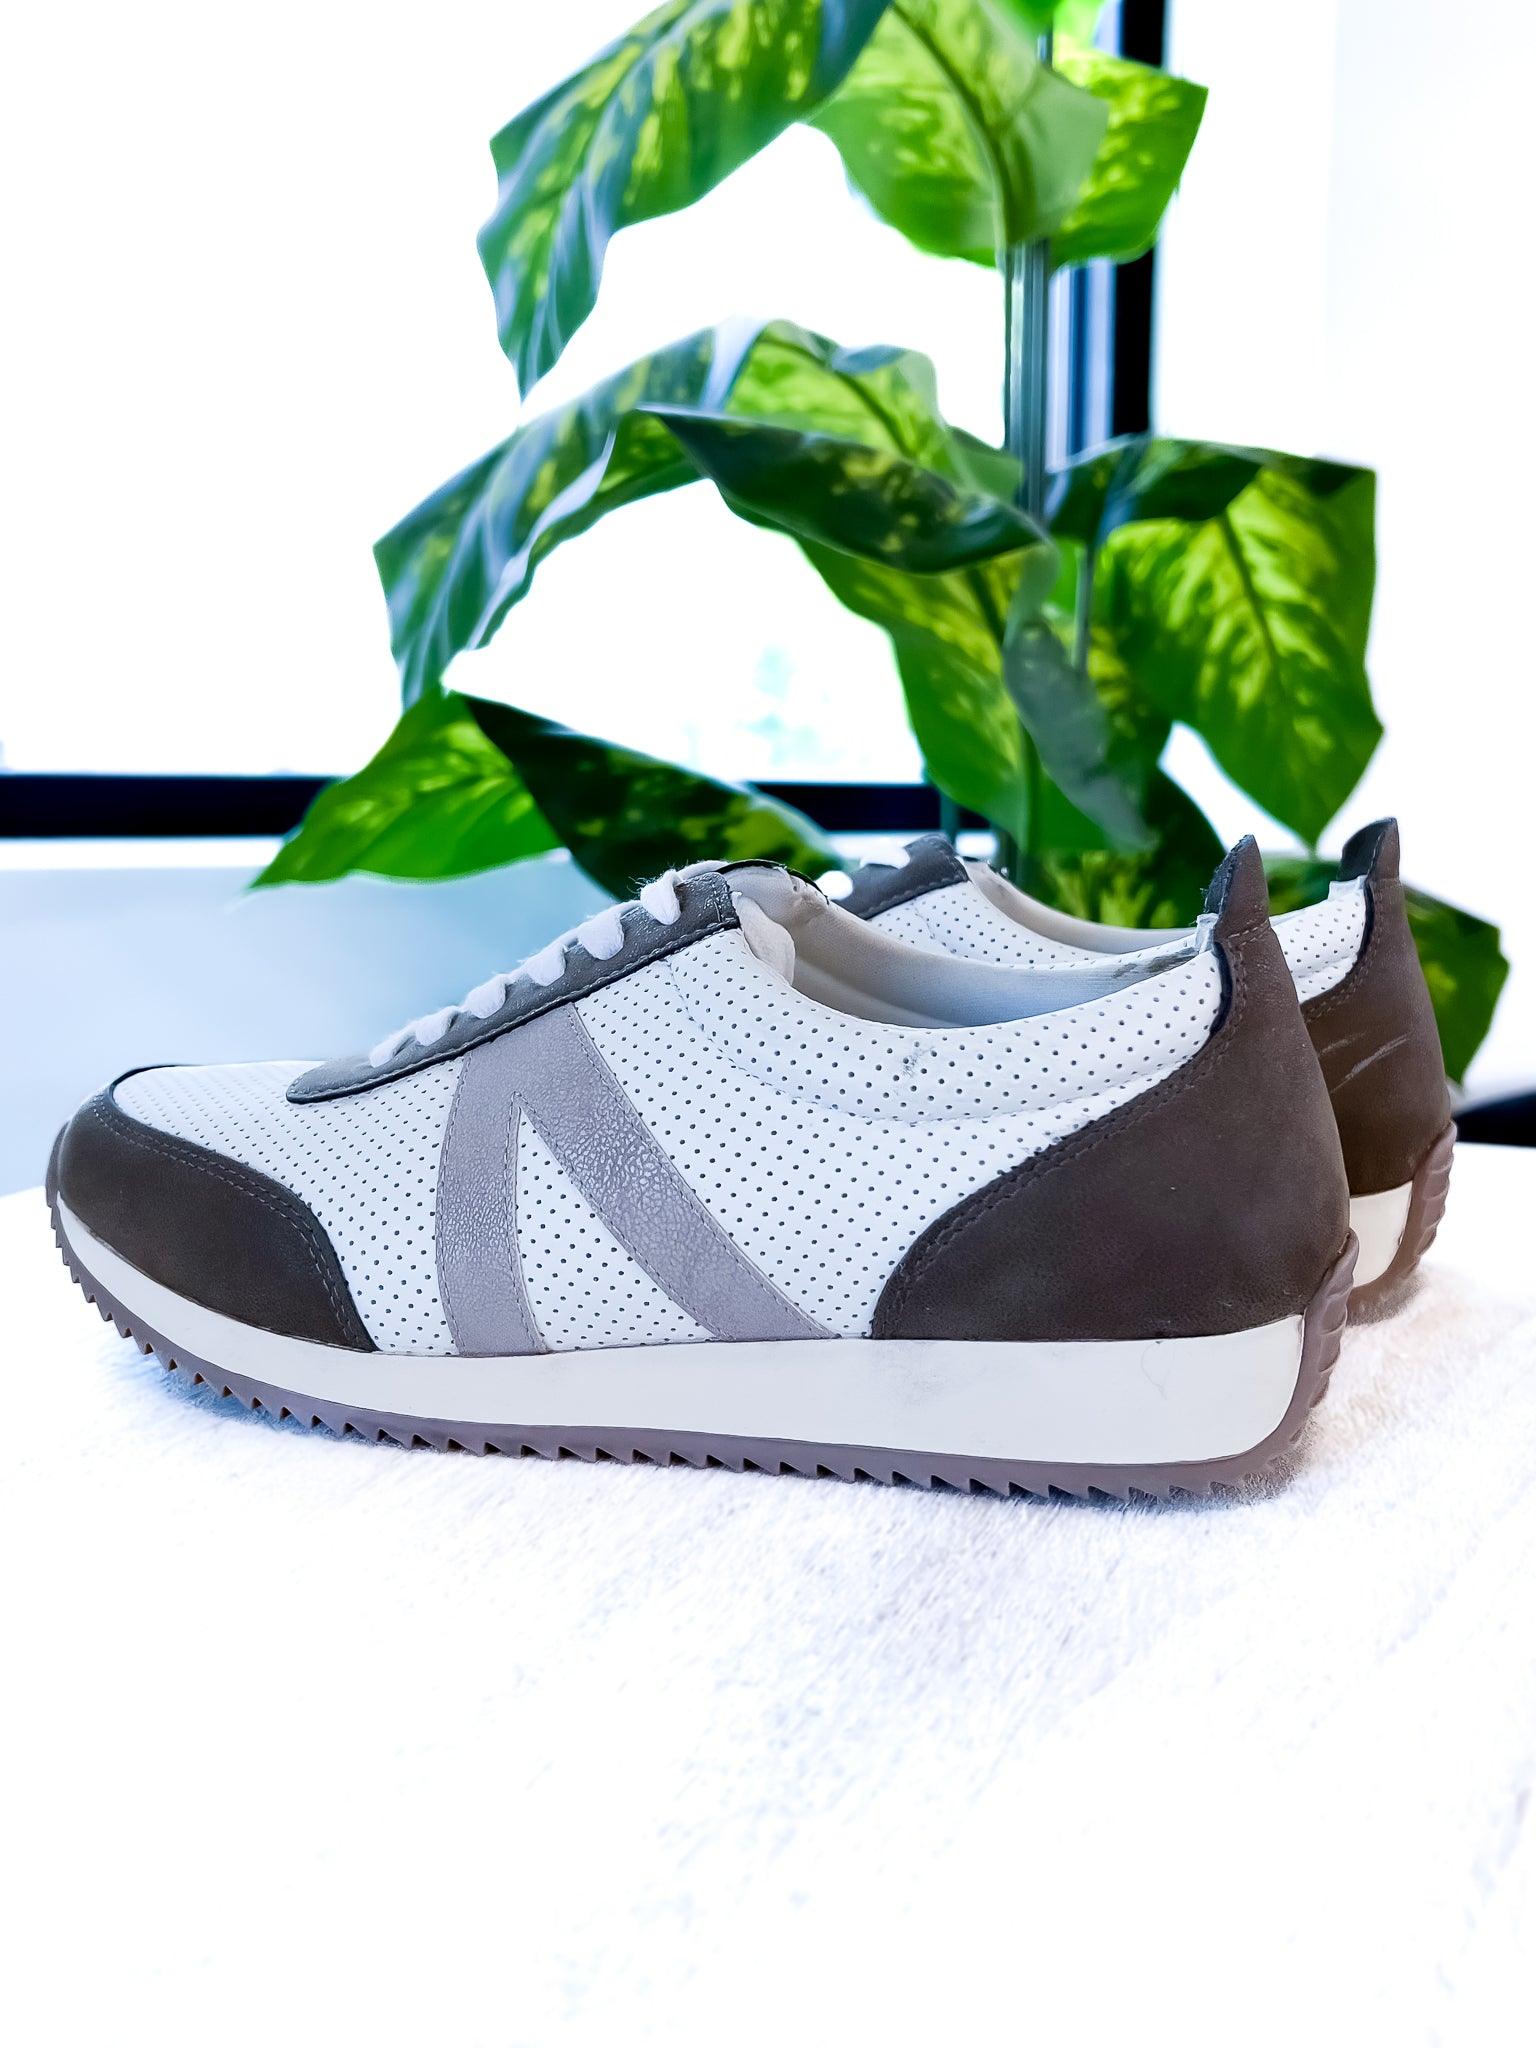 Kable Sneakers - The ZigZag Stripe